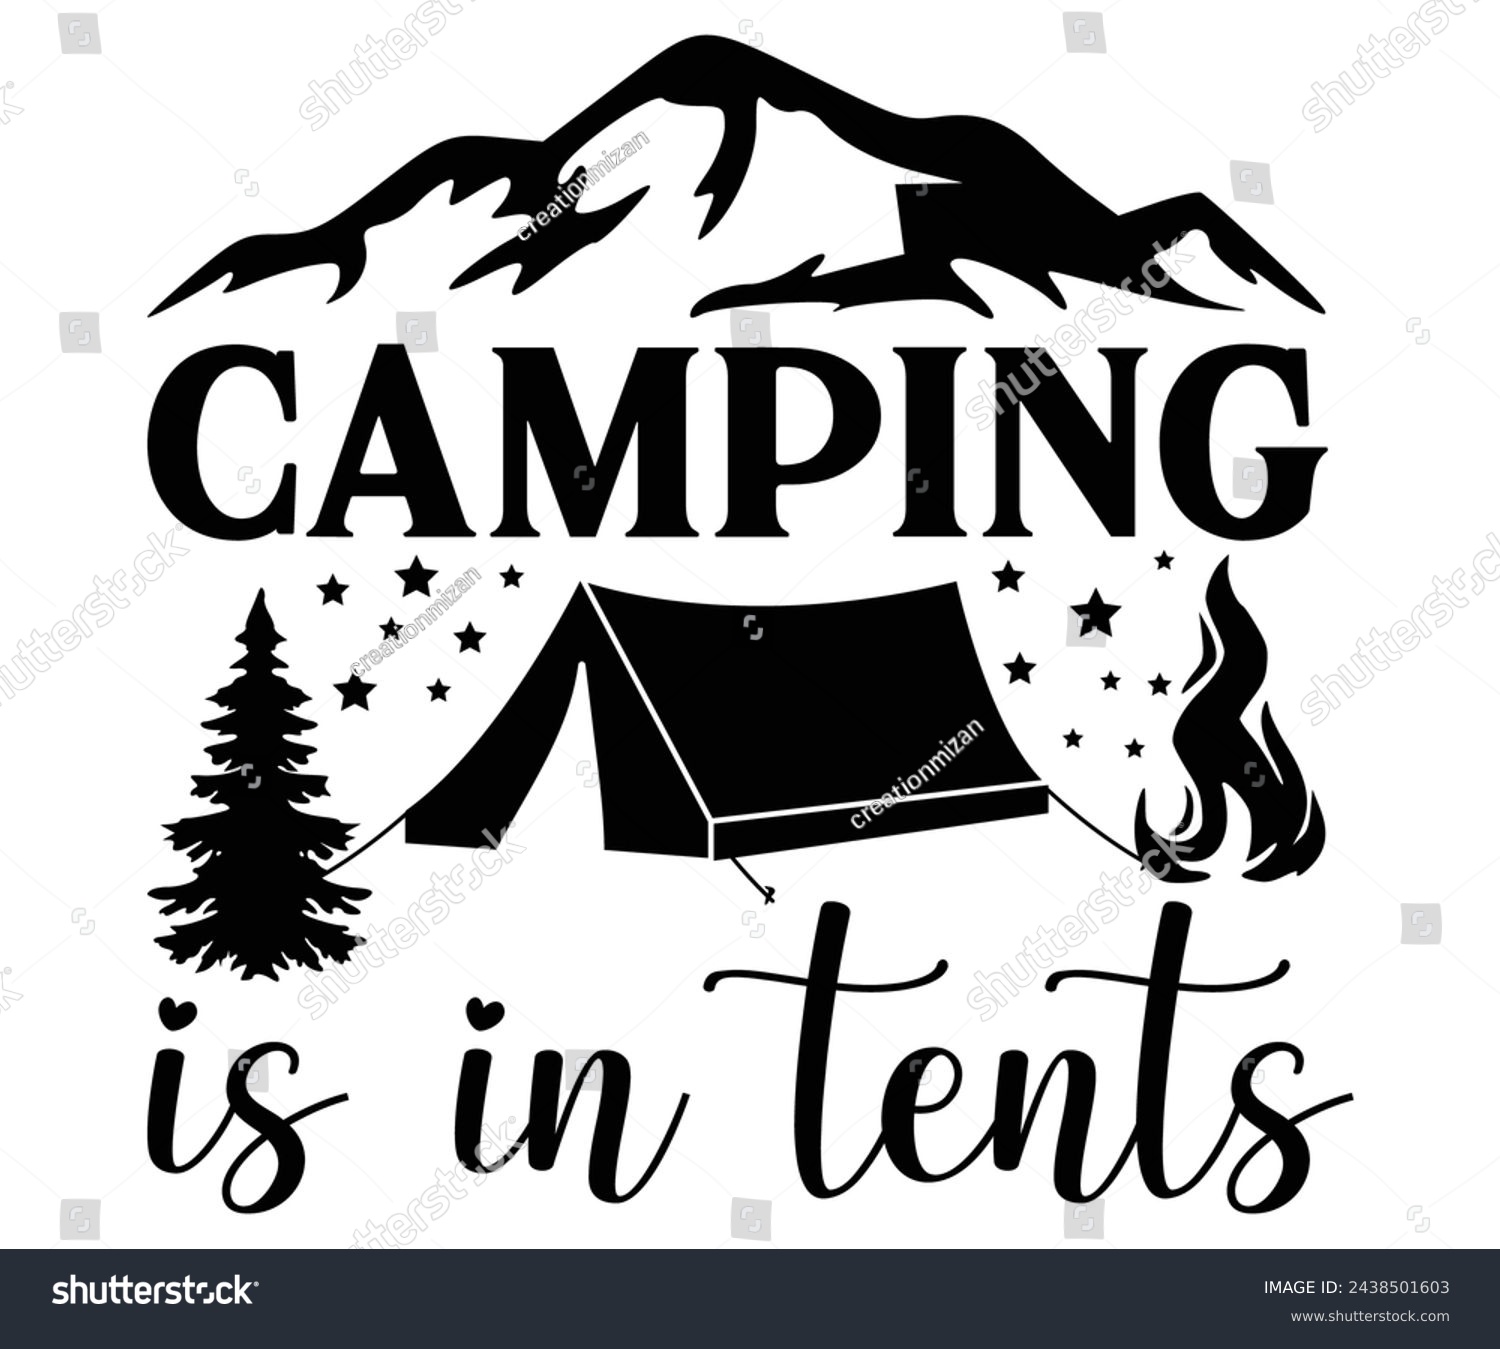 SVG of Camping Is in tents Svg,Camping Svg,Hiking,Funny Camping,Adventure,Summer Camp,Happy Camper,Camp Life,Camp Saying,Camping Shirt svg